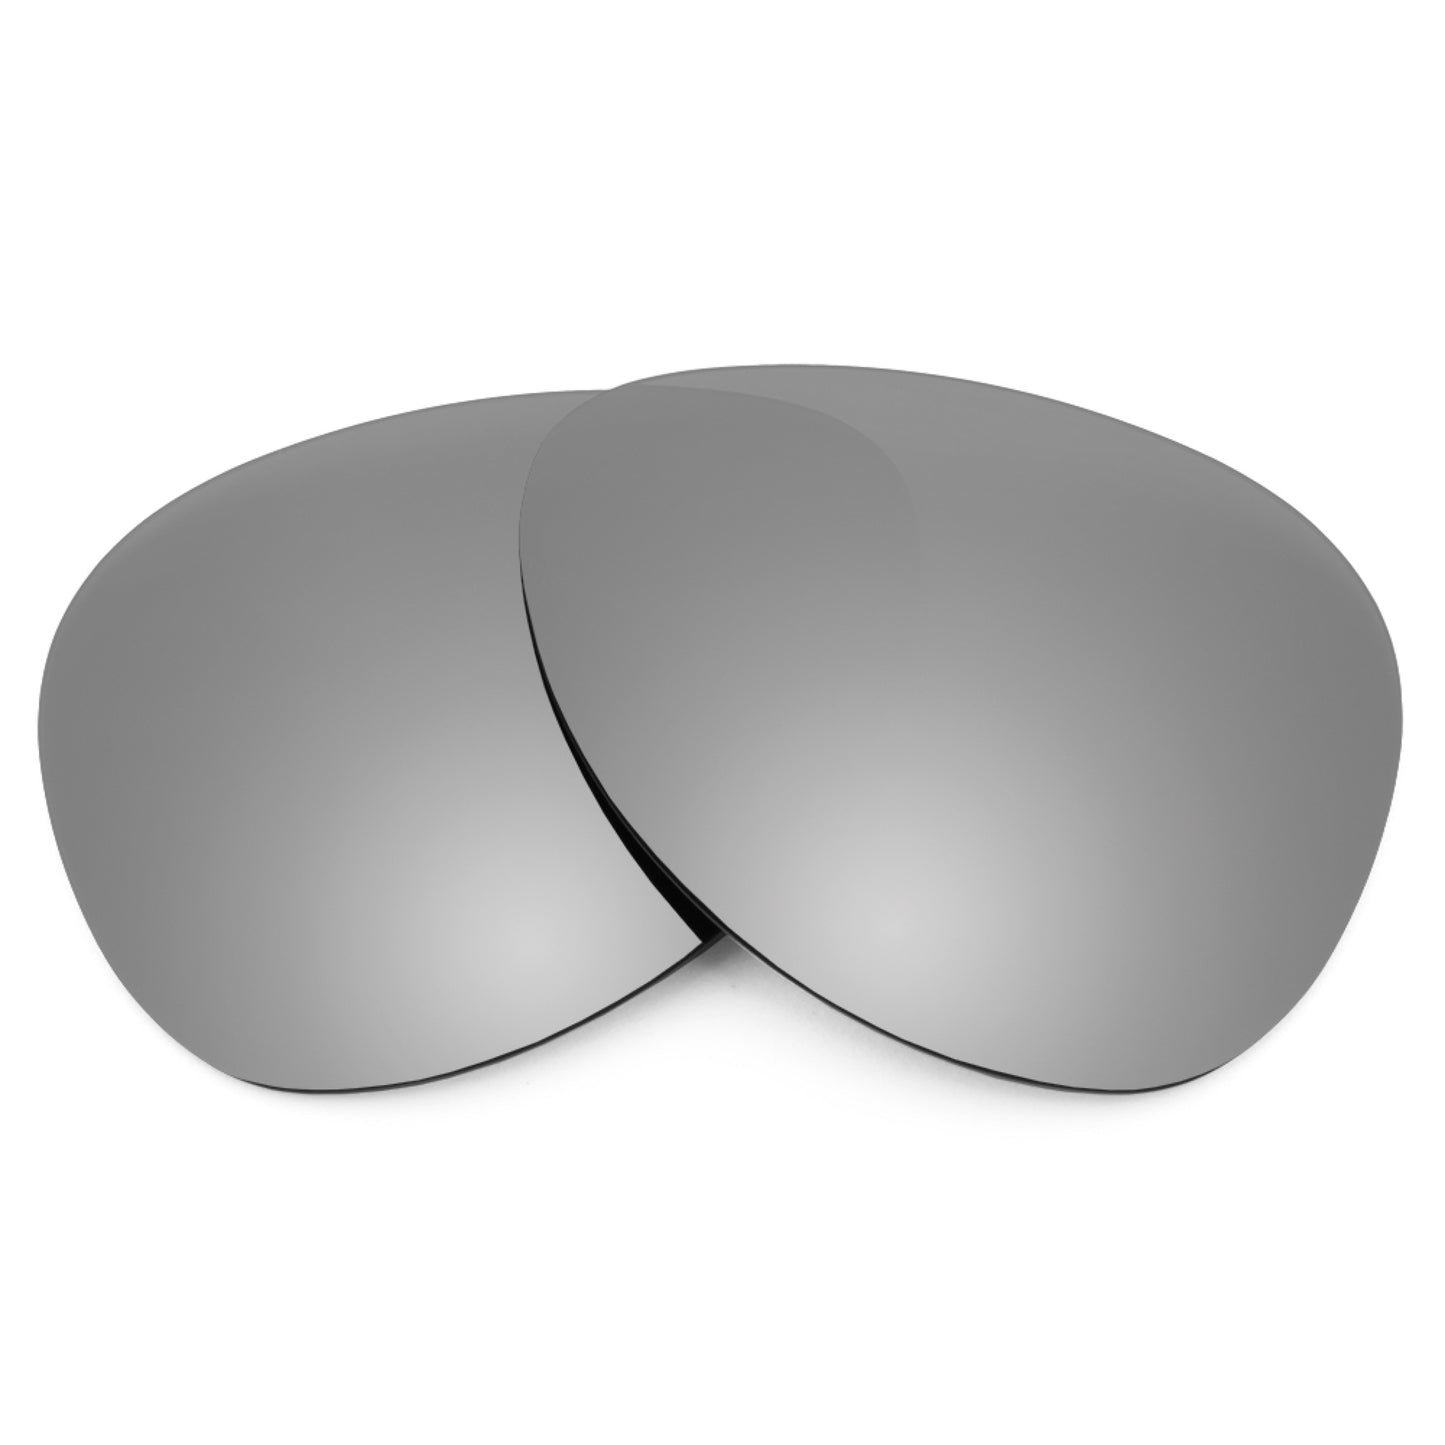 Revant replacement lenses for Ray-Ban RB3533 57mm Non-Polarized Titanium